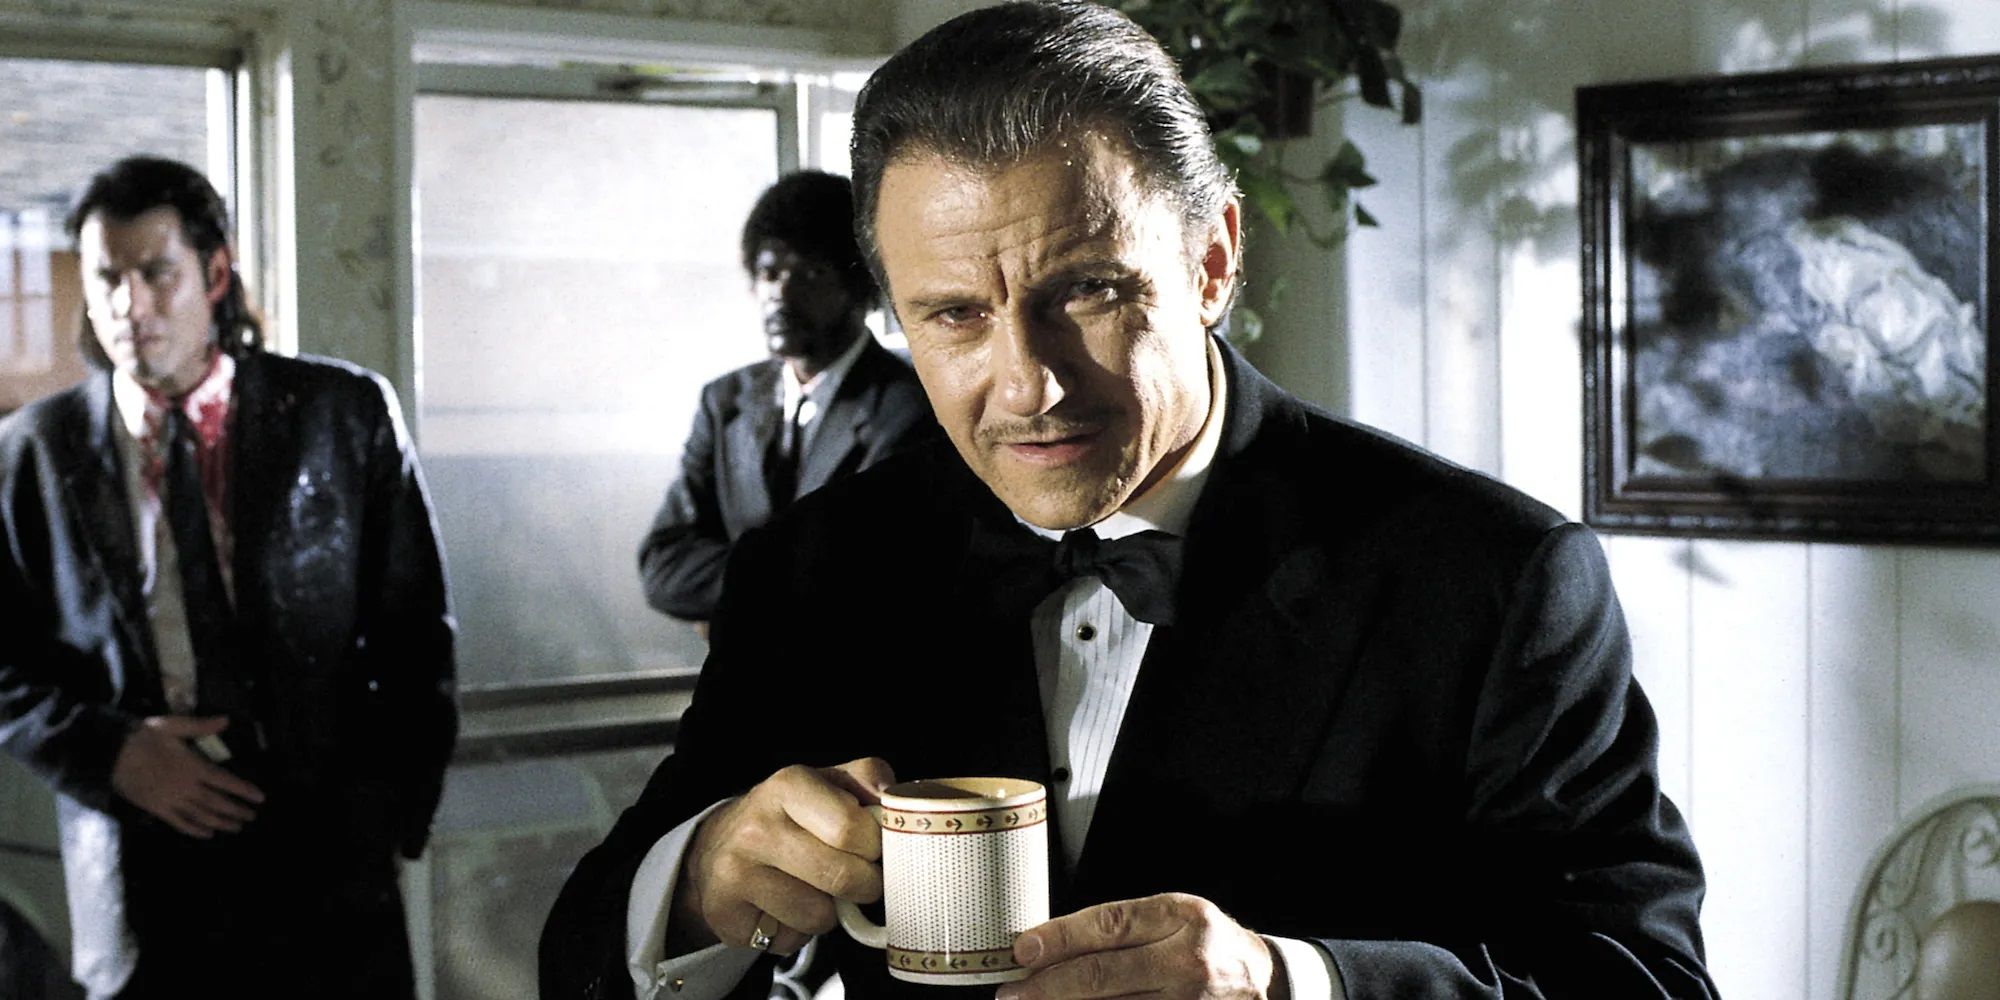 Harvey Keitel as Winston Wolf drinks a coffee (with John Travolta as Vincent Vega and Samuel L. Jackson as Jules in the background) in Pulp Fiction